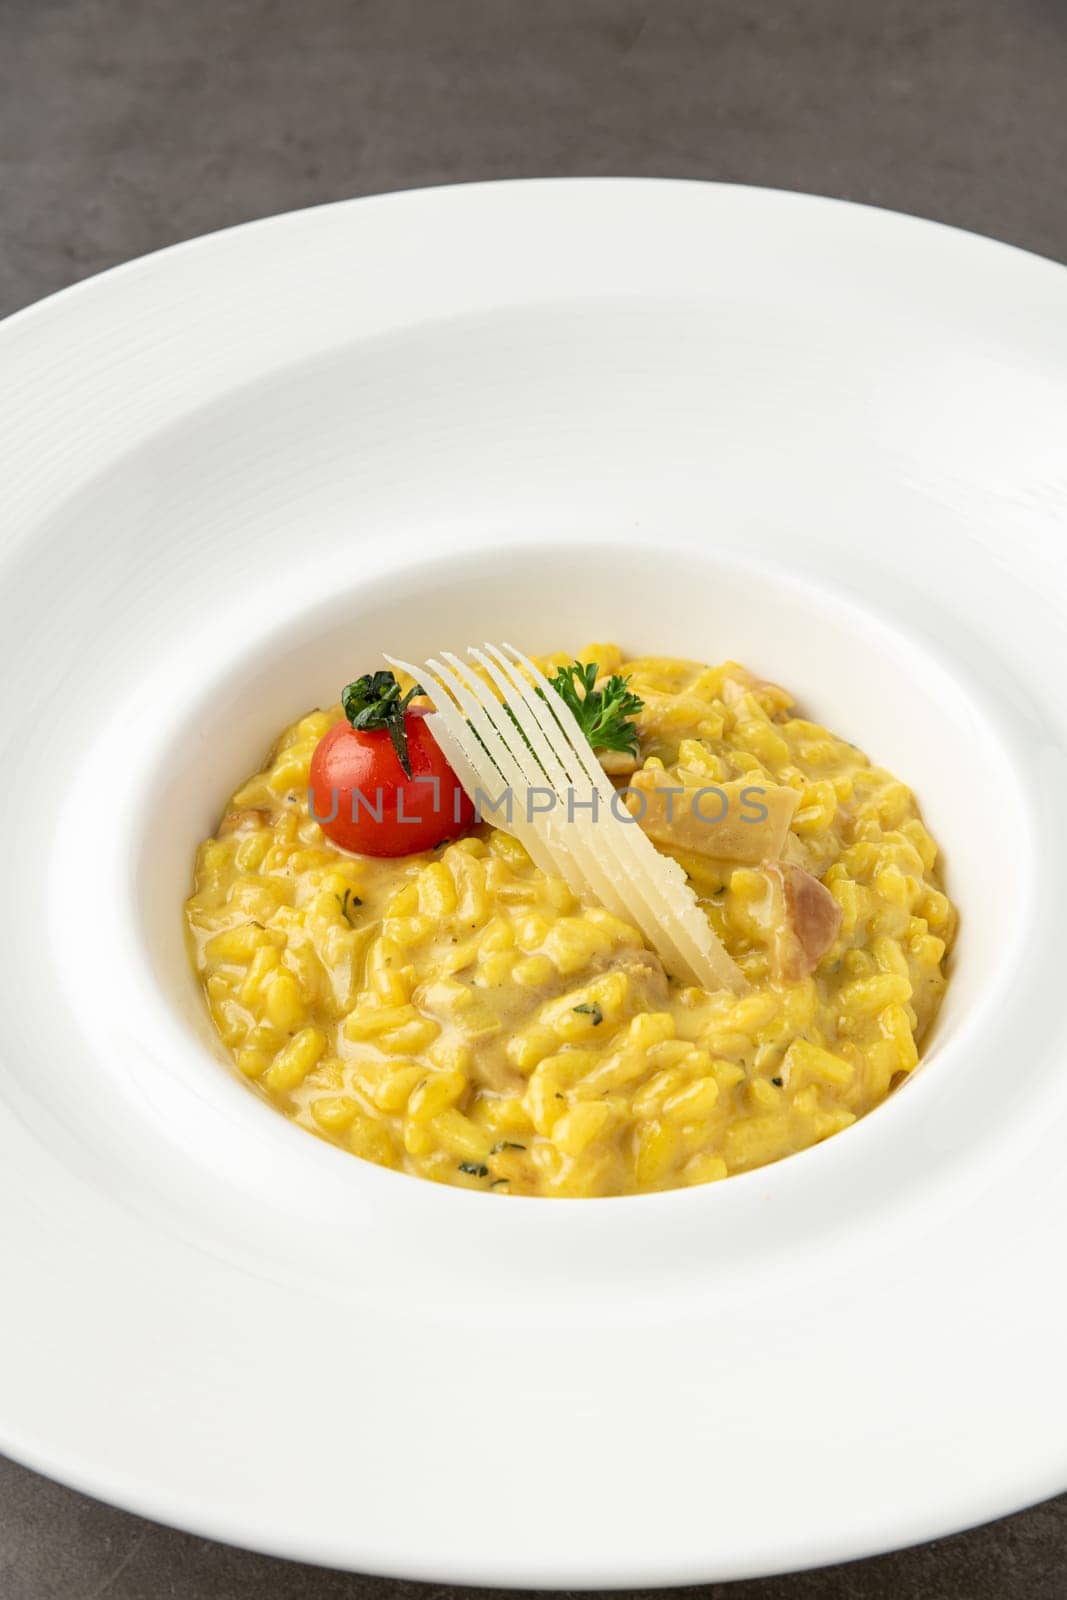 Parmesan cheese risotto on a white porcelain plate by Sonat